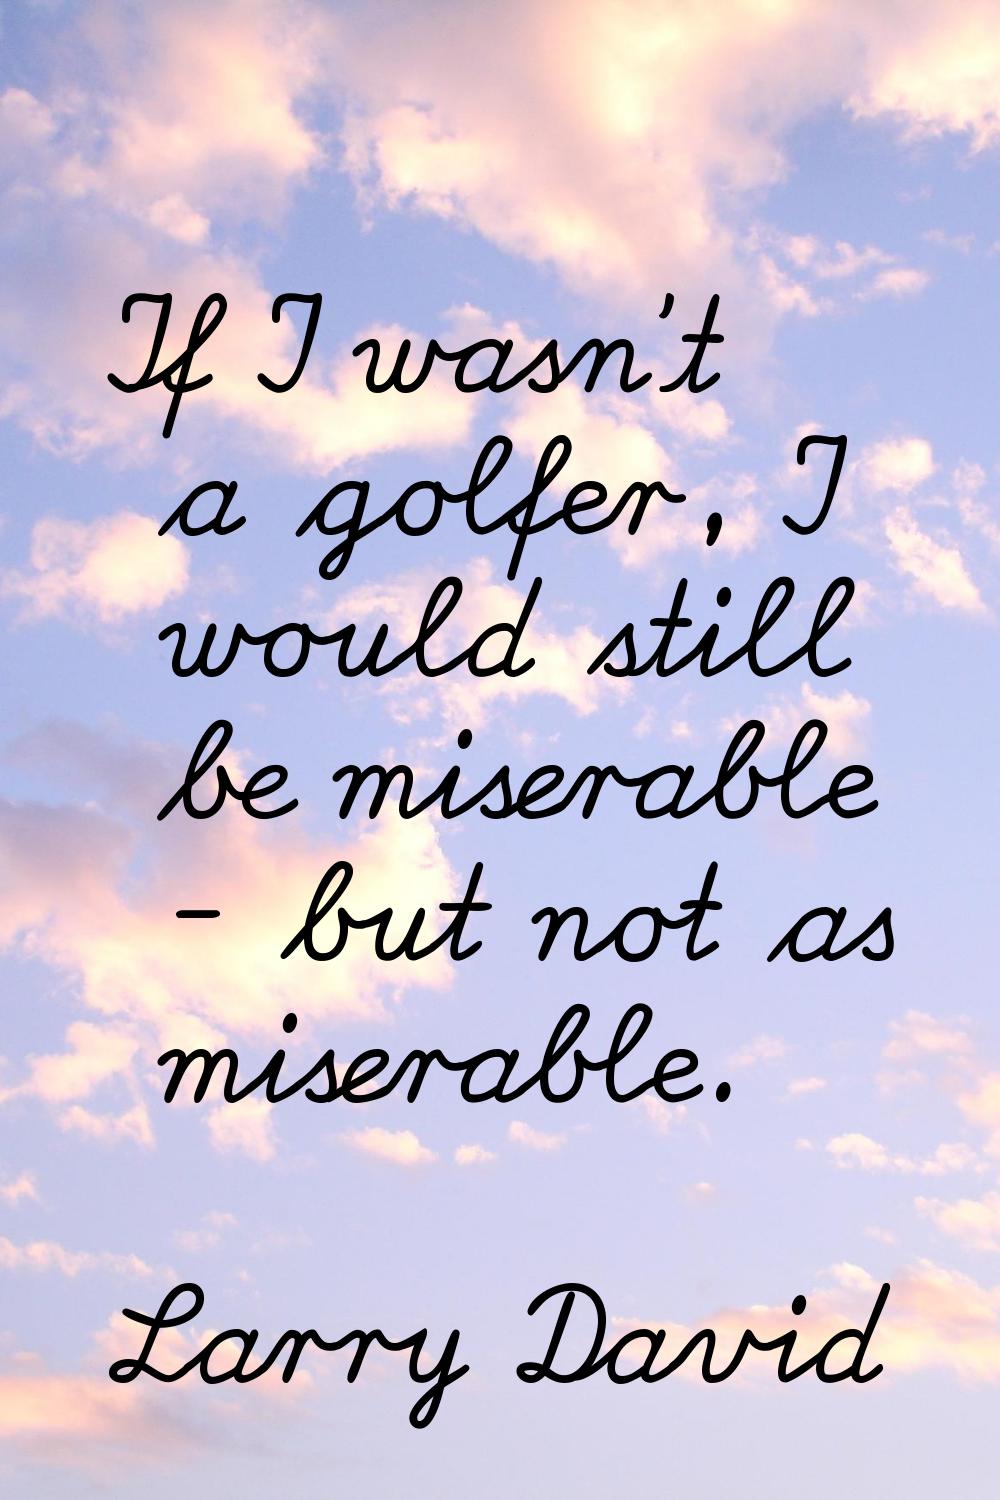 If I wasn't a golfer, I would still be miserable - but not as miserable.